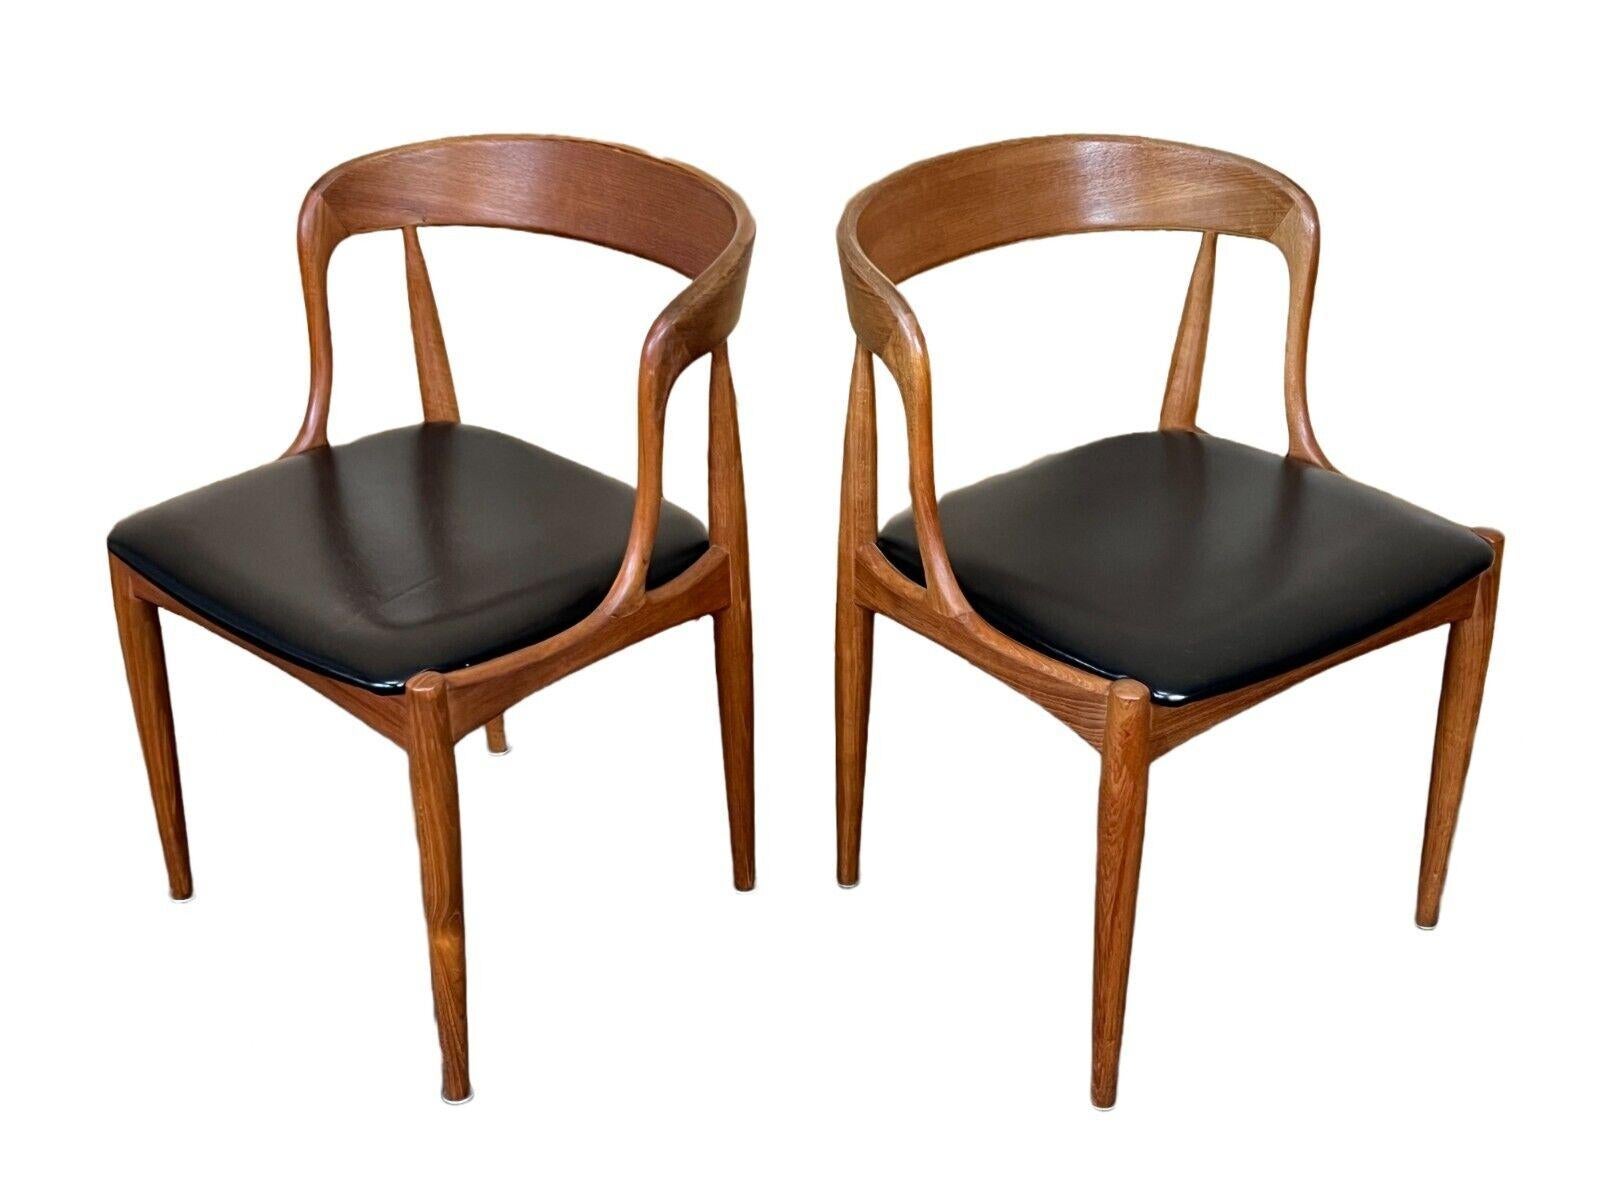 2x 1960s-1970s Dining Chair Johannes Andersen for Uldum Danish design

Object: 2x chair

Manufacturer: Uldum

Condition: good

Age: around 1960-1970

Dimensions:

Width = 50cm
Depth = 55cm
Height = 72cm
Seat height = 43.5cm

Other